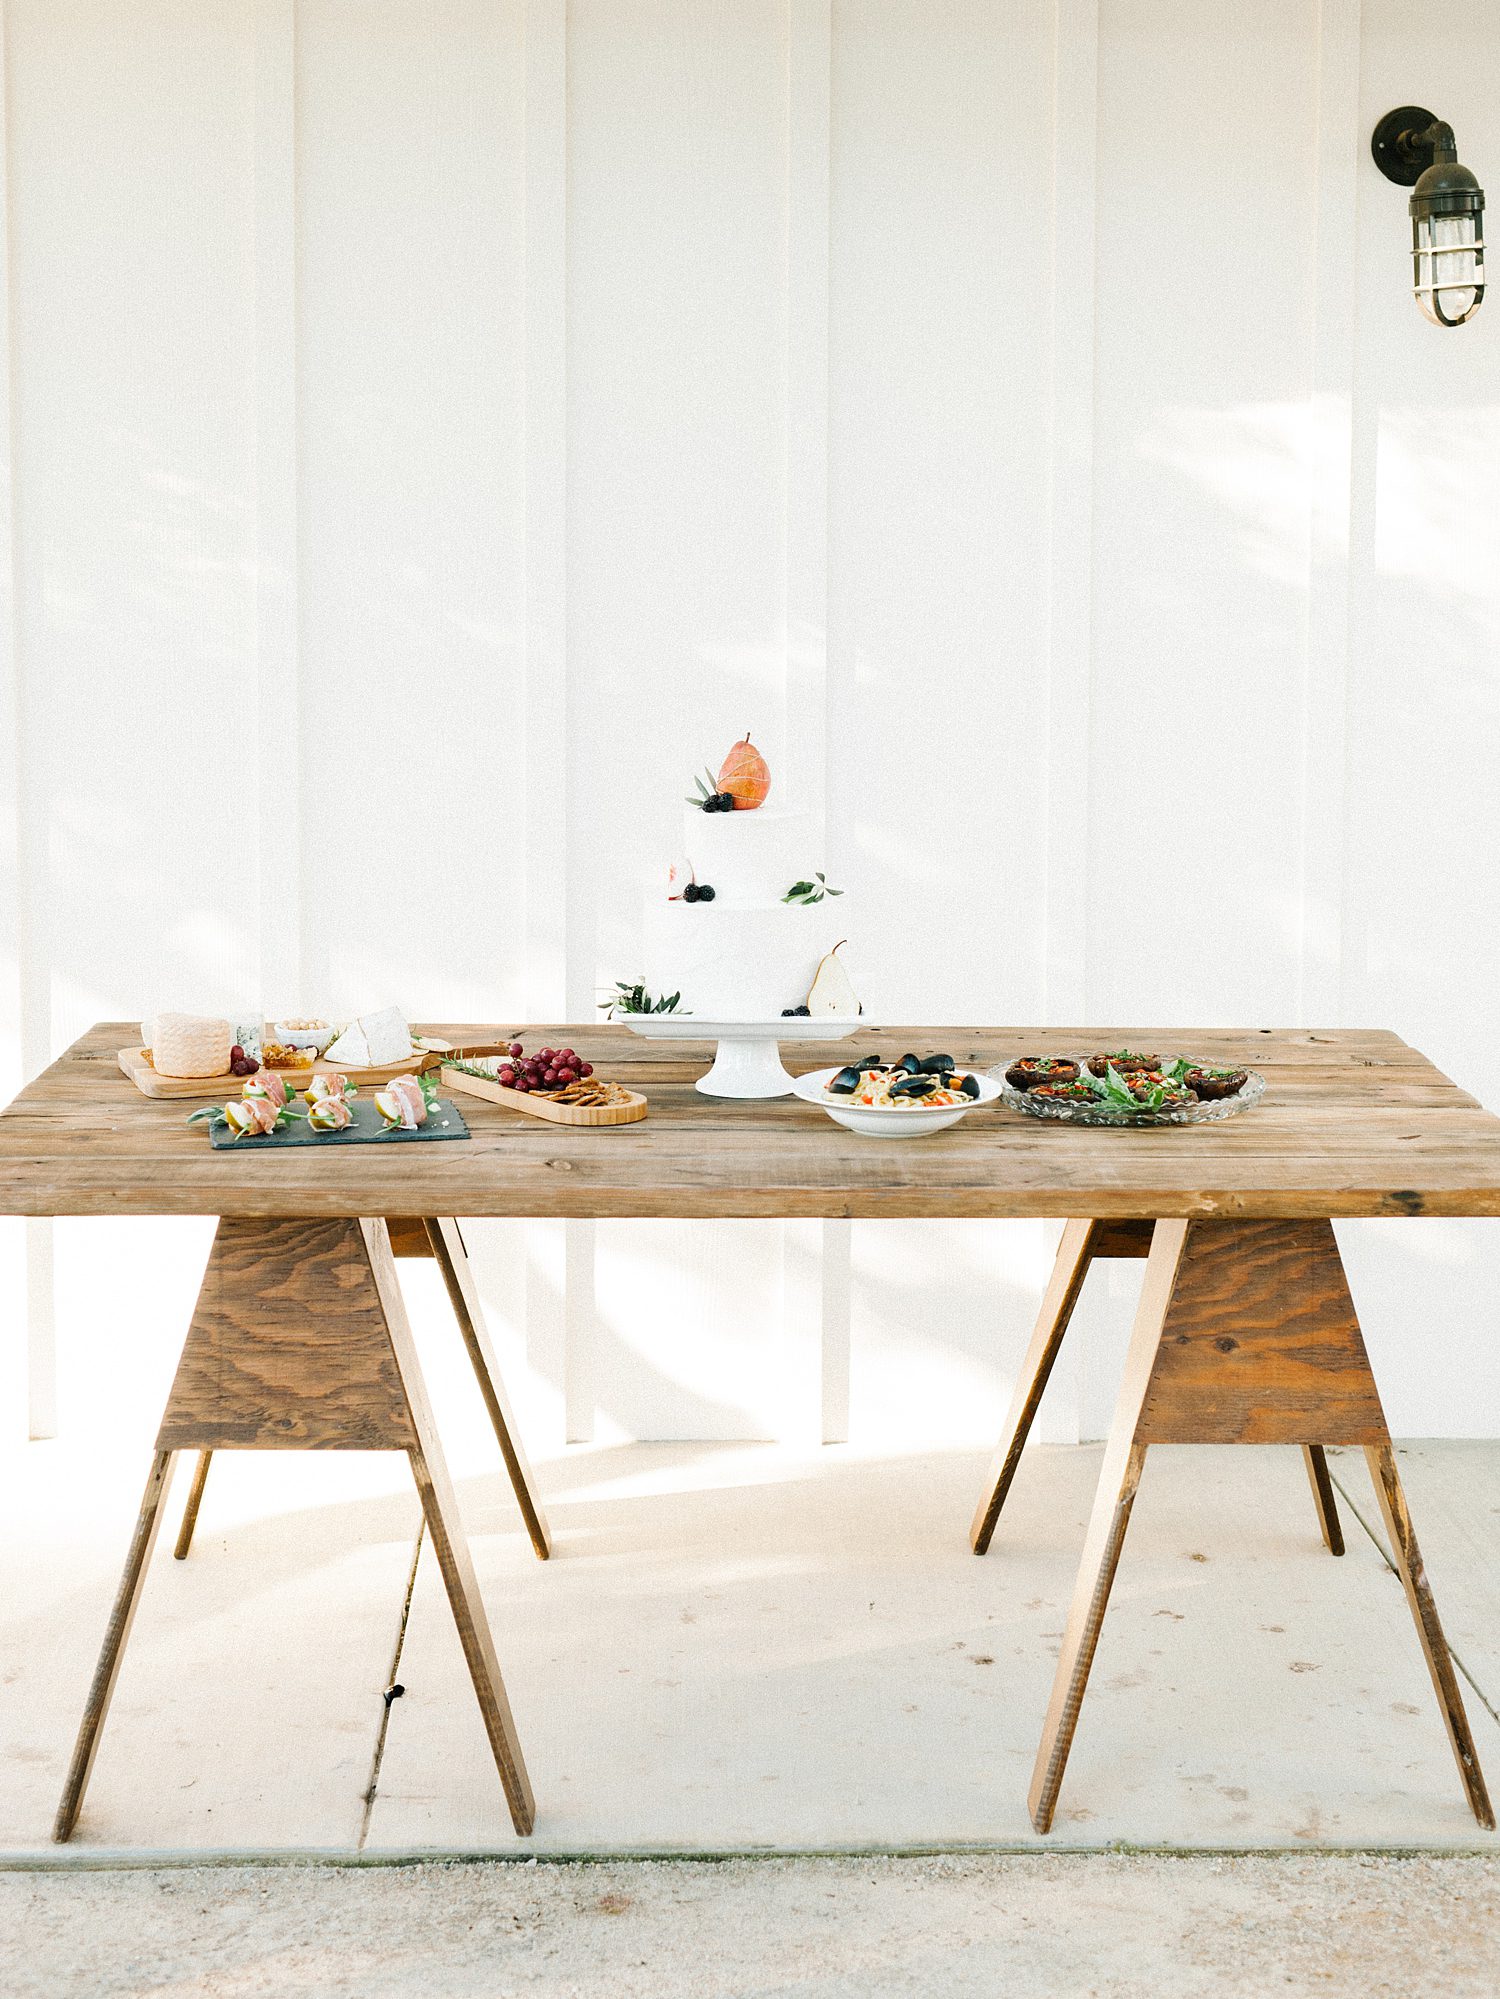 Food on rustic table in front of border and baton white siding at Biddle Ranch Vineyard Wedding by Edna Valley Wedding Photographer Austyn Elizabeth Photography